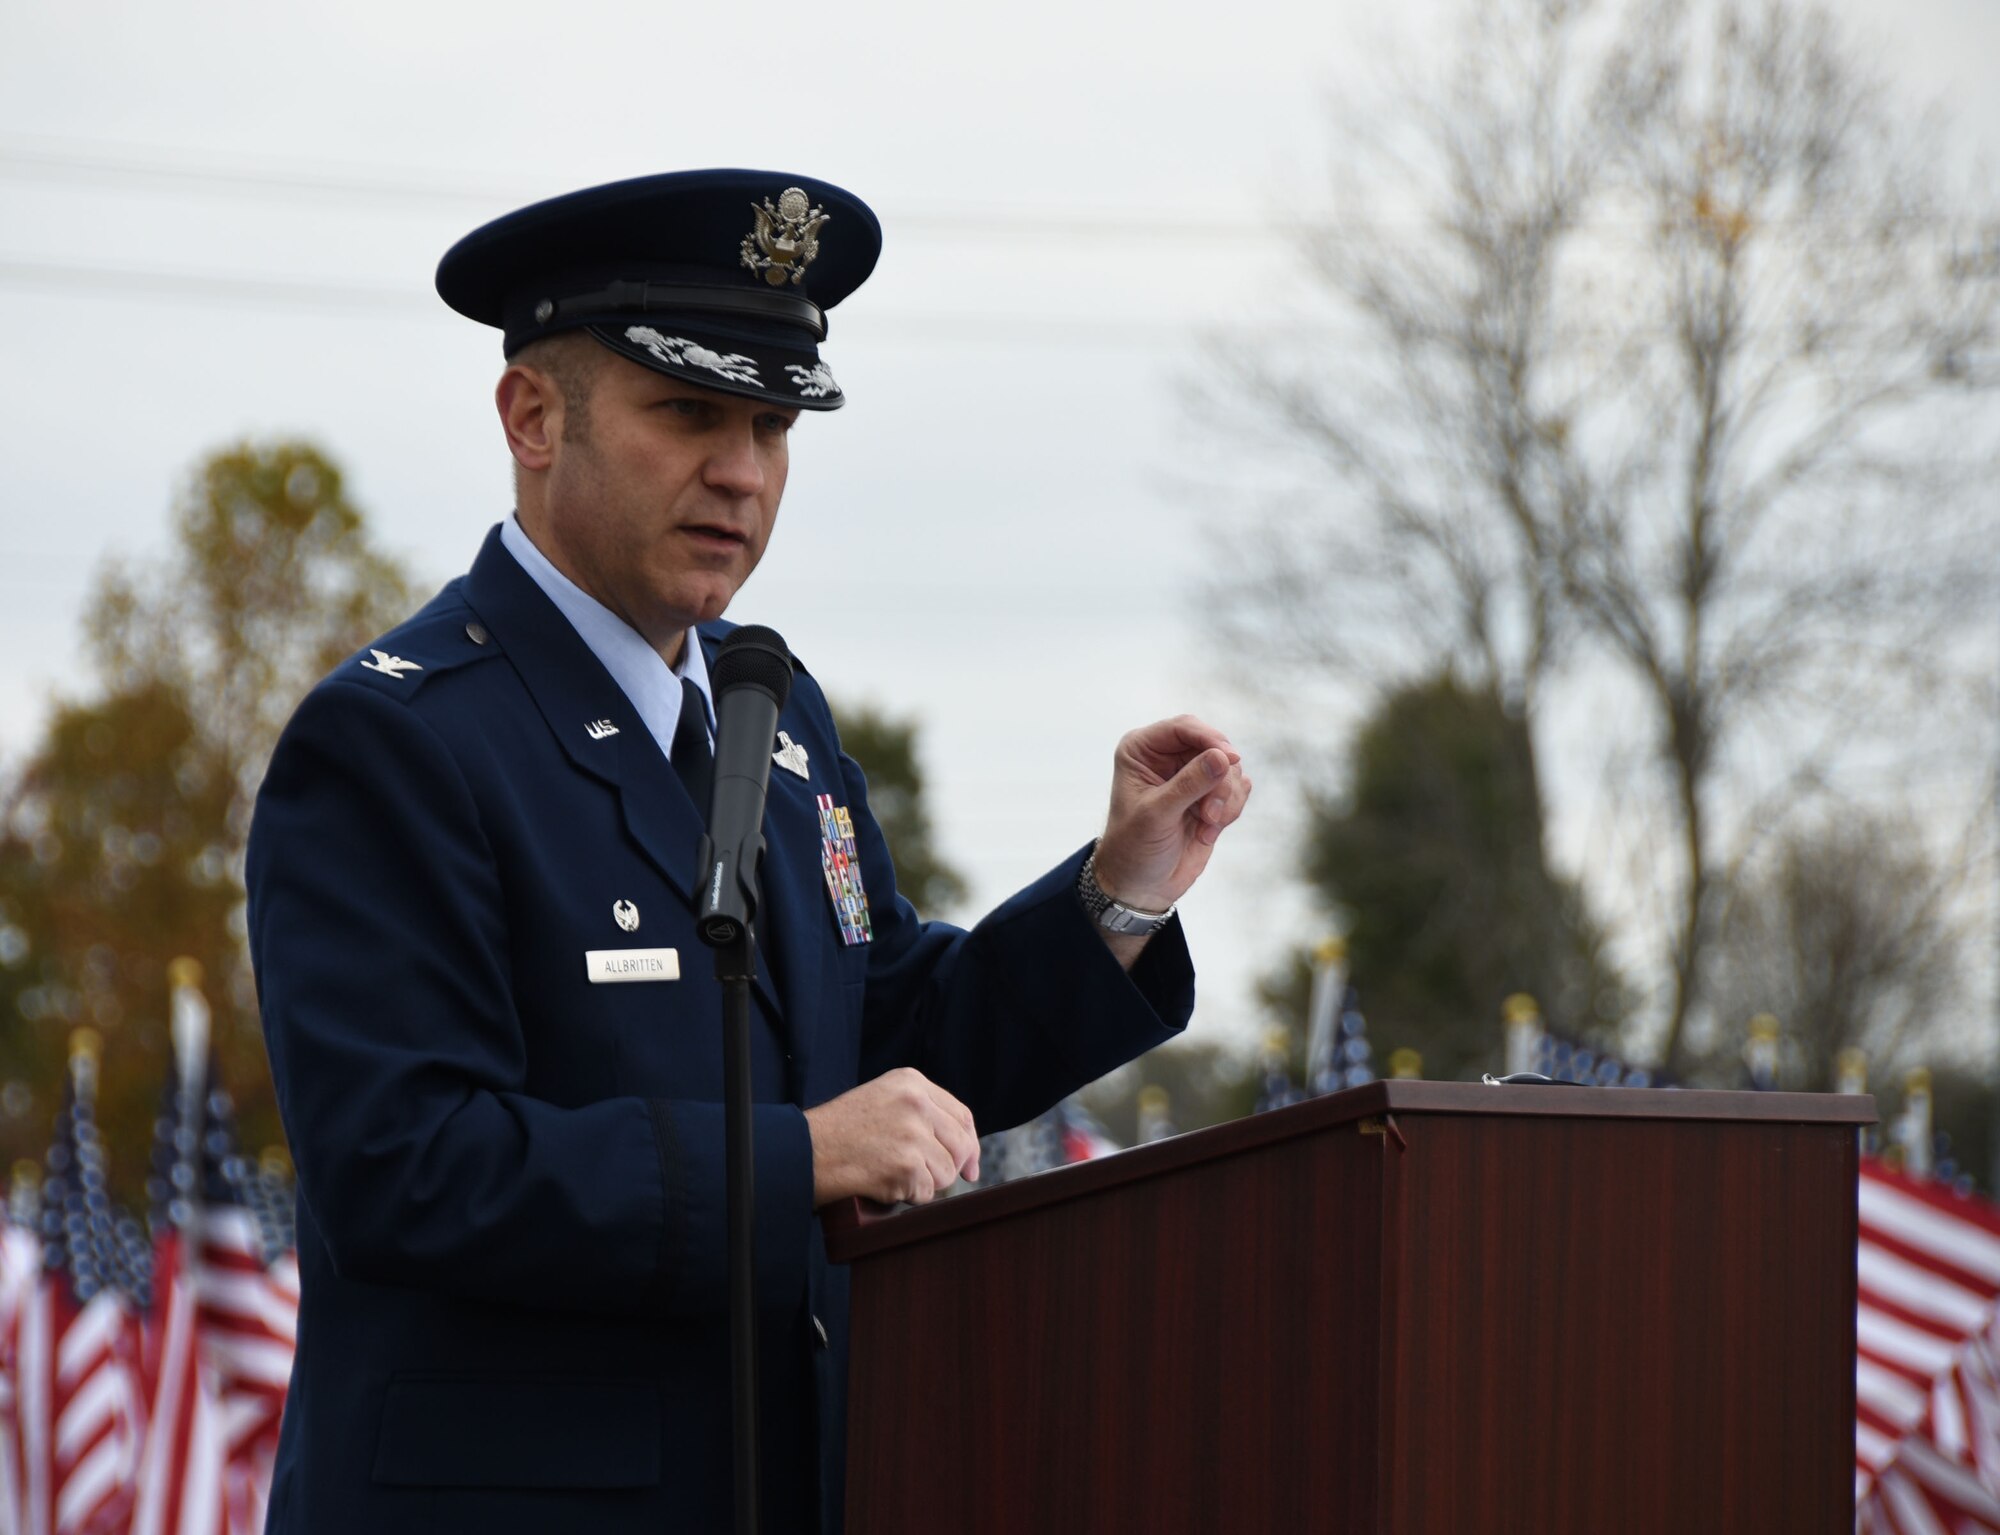 Col. Keith Allbritten, commander of the 118th Wing, gives the keynote address at a Veterans Day weekend event on Nov. 9, 2018 in Hermitage, Tennessee.